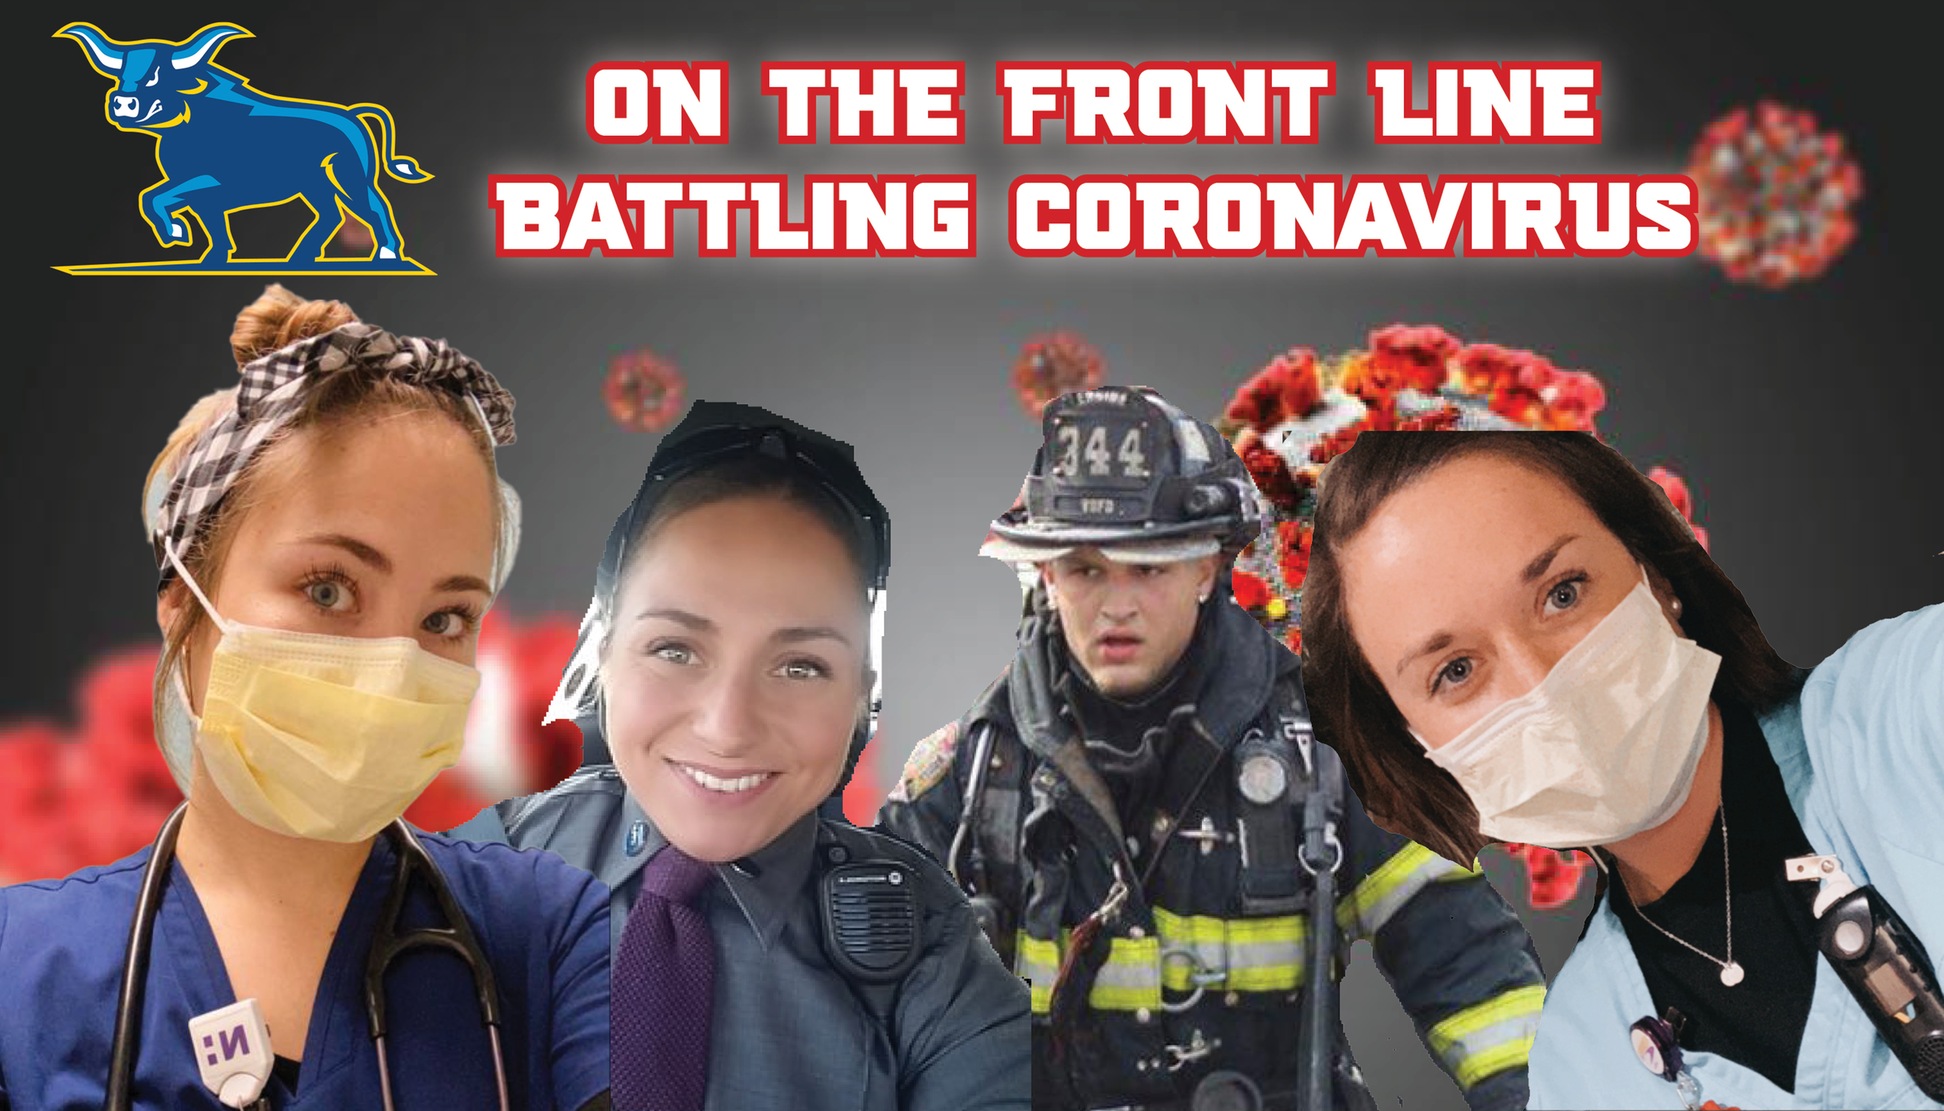 Alfred State student-athletes are all over the front line of the battle against Coronavirus - pictures of four Pioneer alum on the front line.